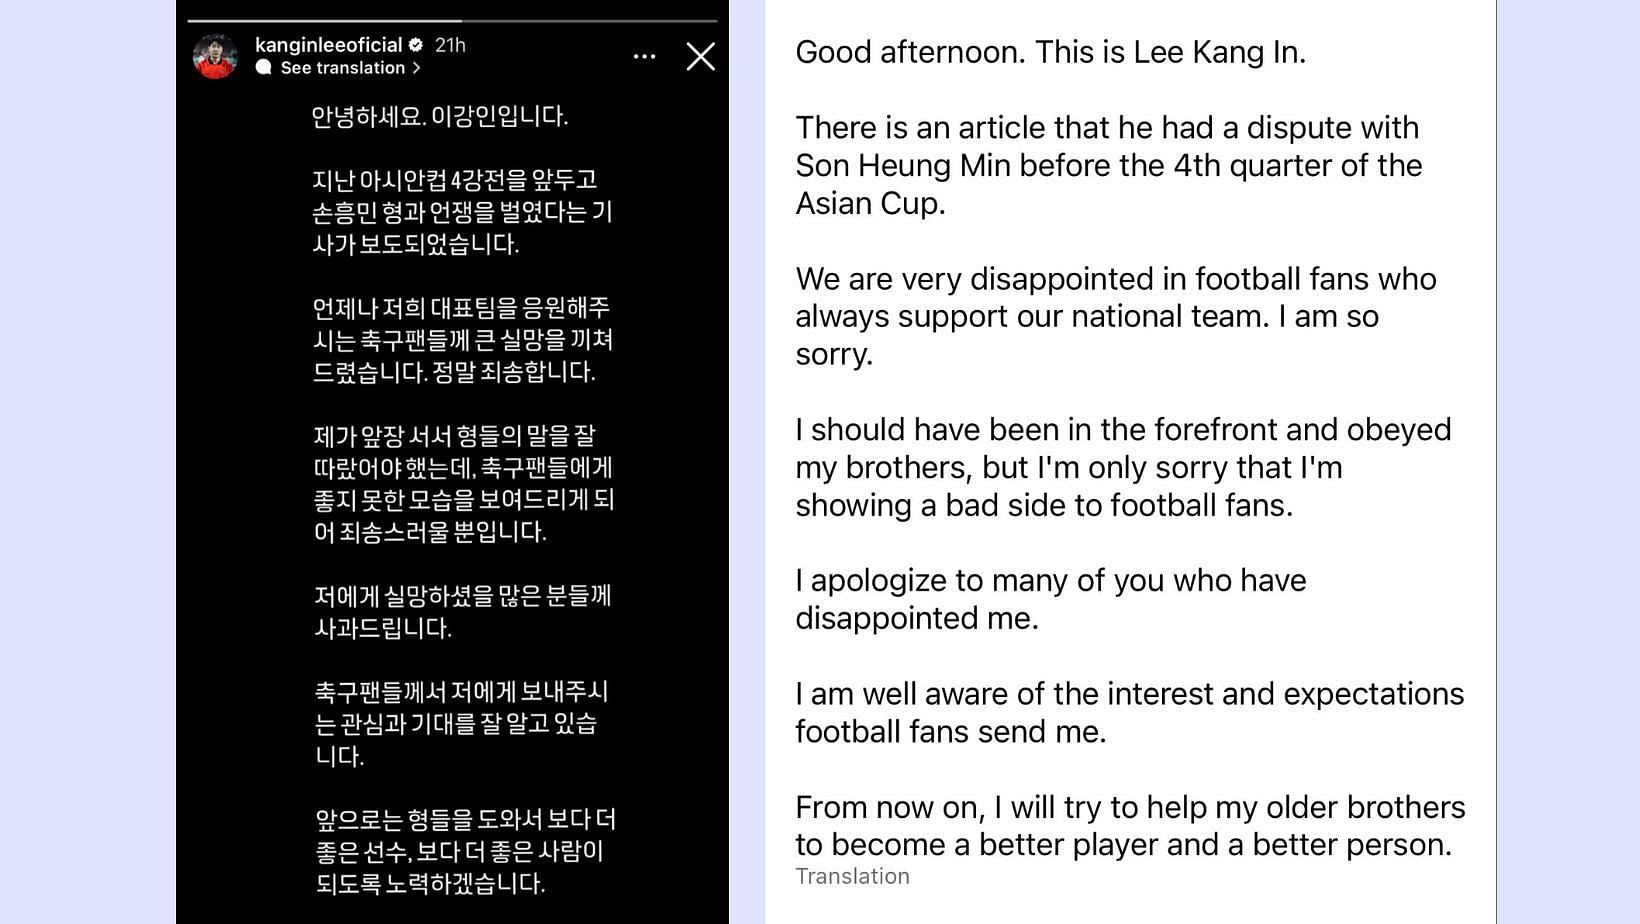 Lee Kang-in issues an apology letter on Instagram story. (Image via Instagram/@kanginleeoficial &amp; Instagram Translation)